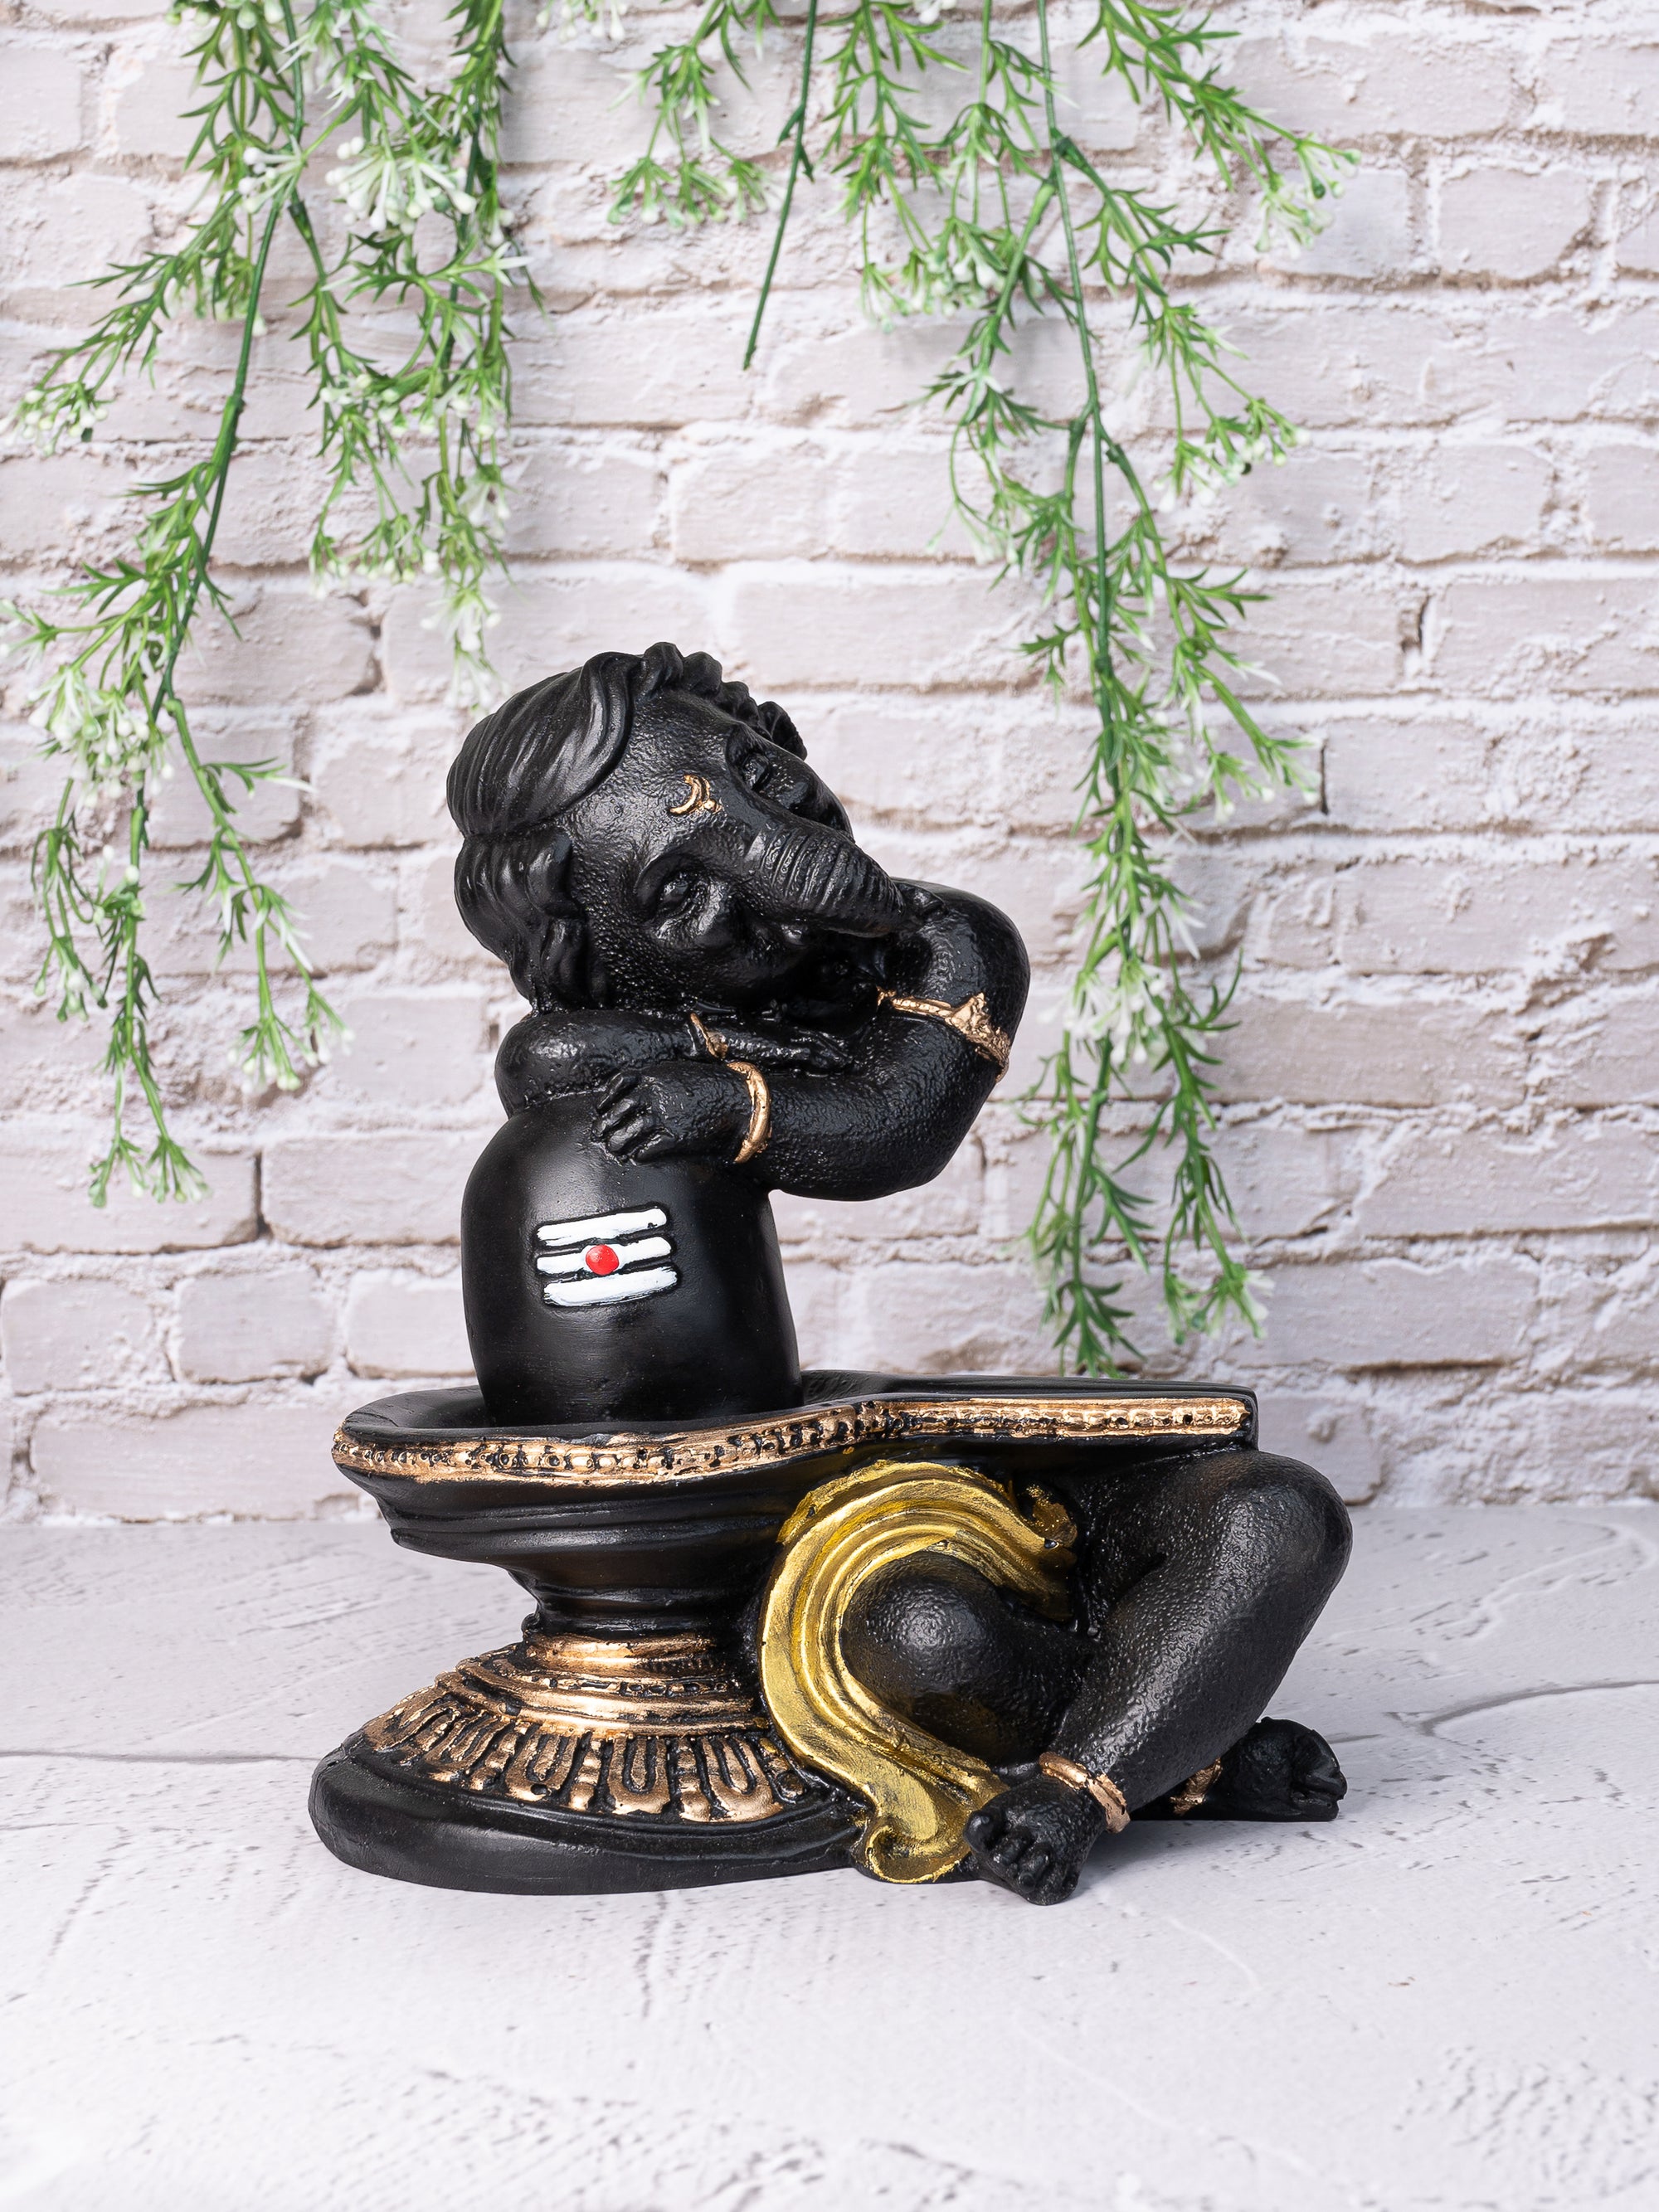 Lord Ganesh Shivling Aavatar - Elegant decor for home and office